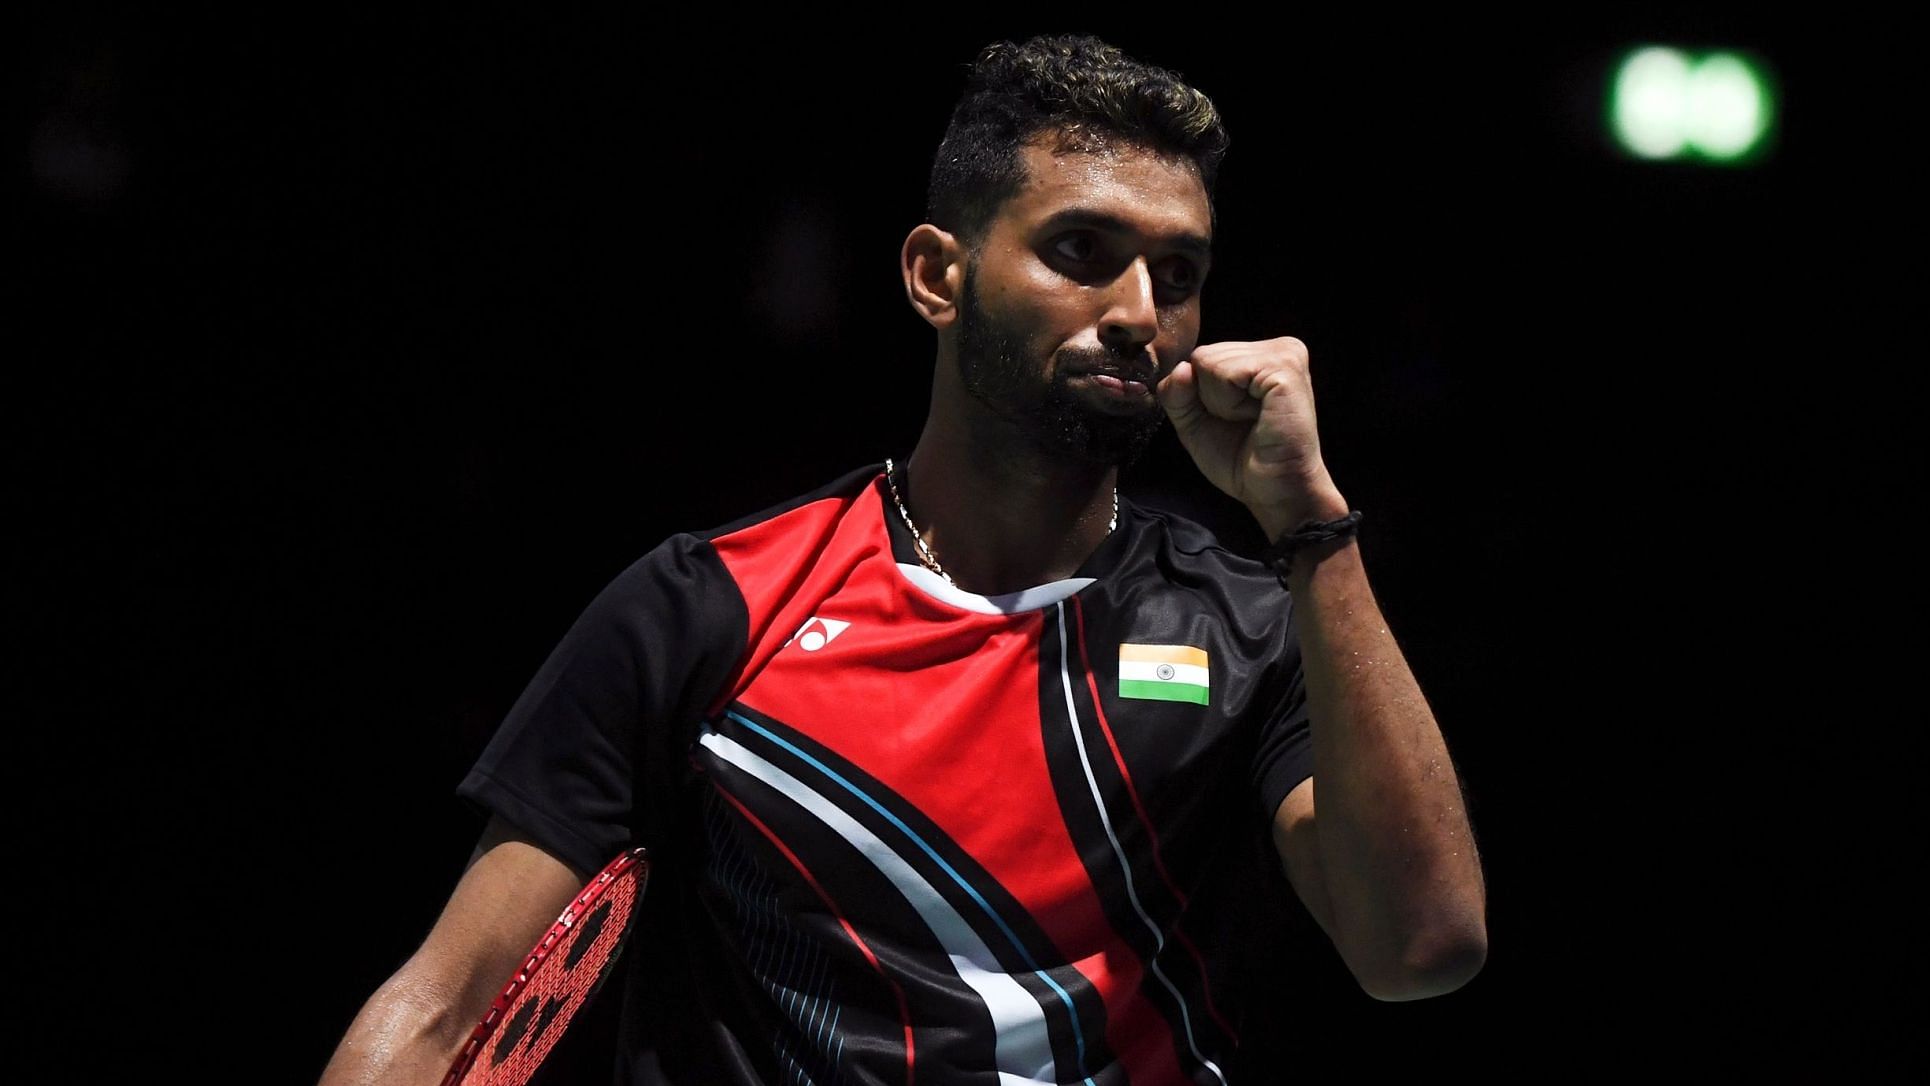 HS Prannoy is among those to have tested positive for COVID-19